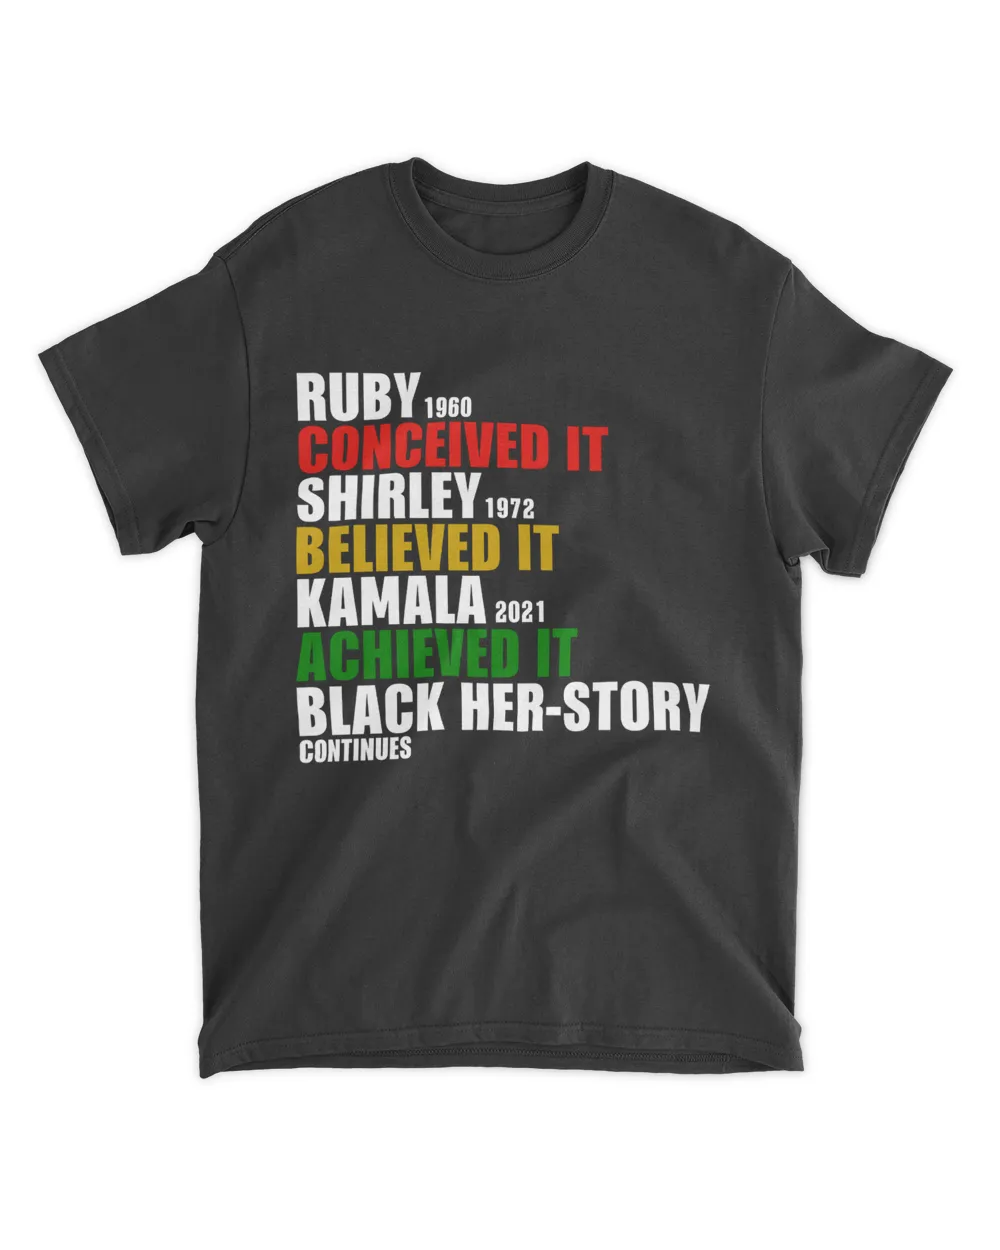 Ruby 1960 conceived it shirley 1972 believed it Kamala 2021 achieved it black her-story continues shirt